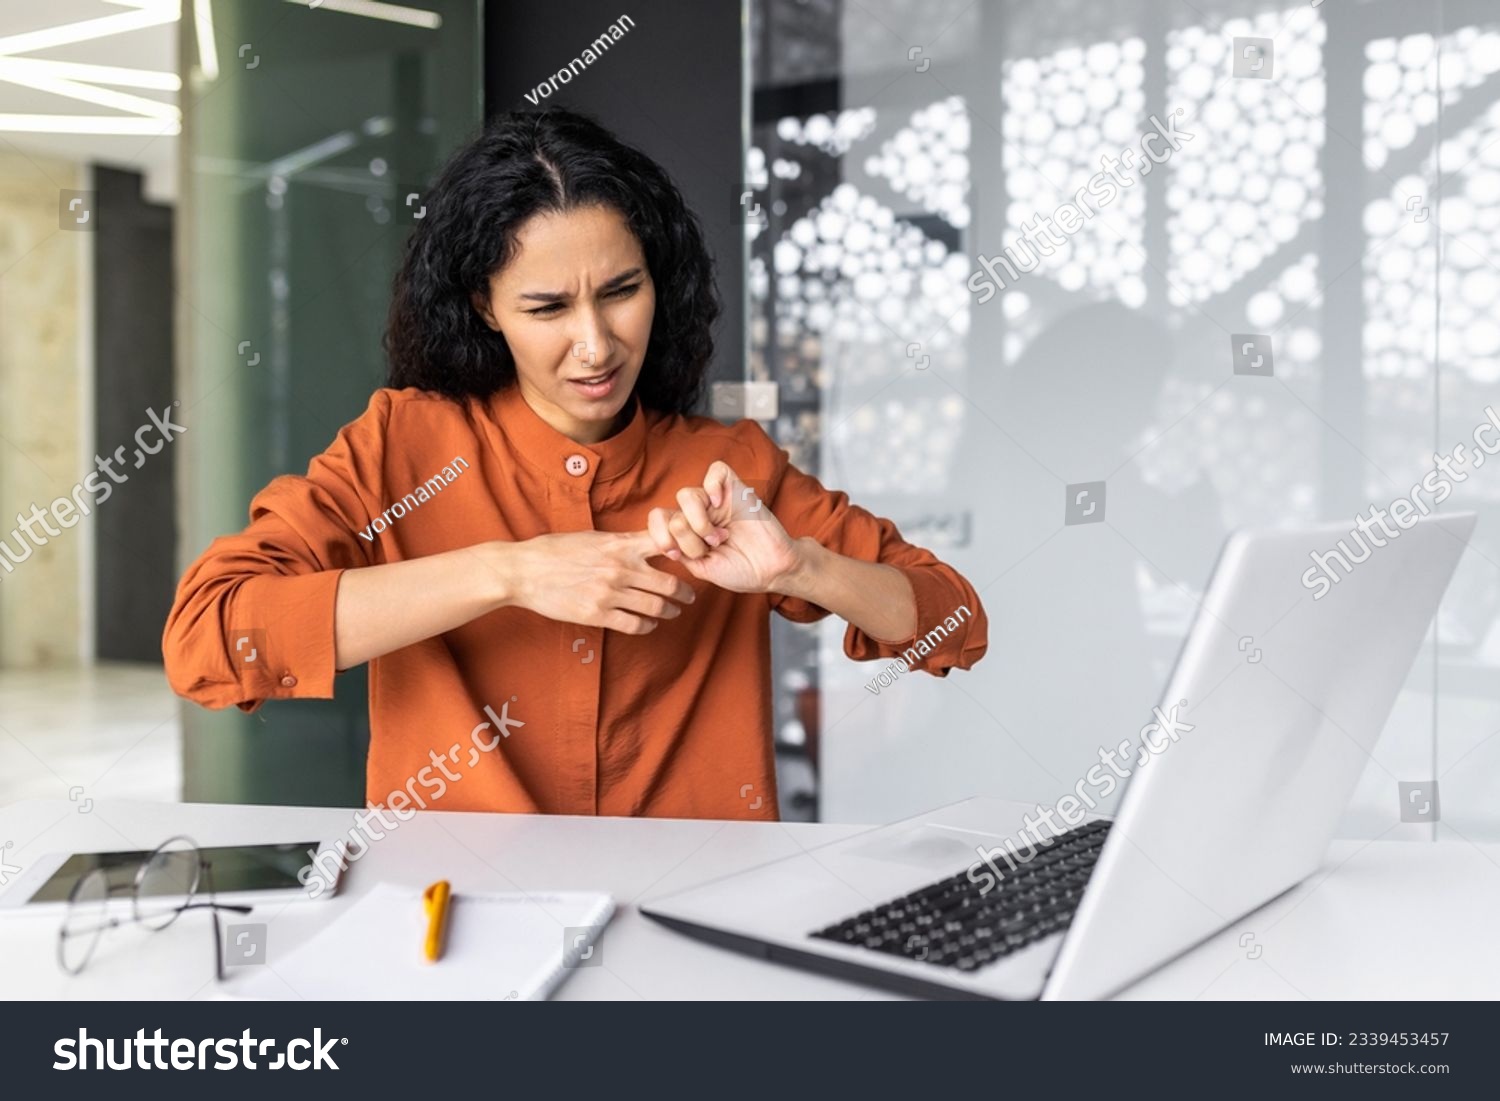 Female office worker overtired has severe pain in fingers and joints, Hispanic woman overworked at workplace with laptop at work. #2339453457